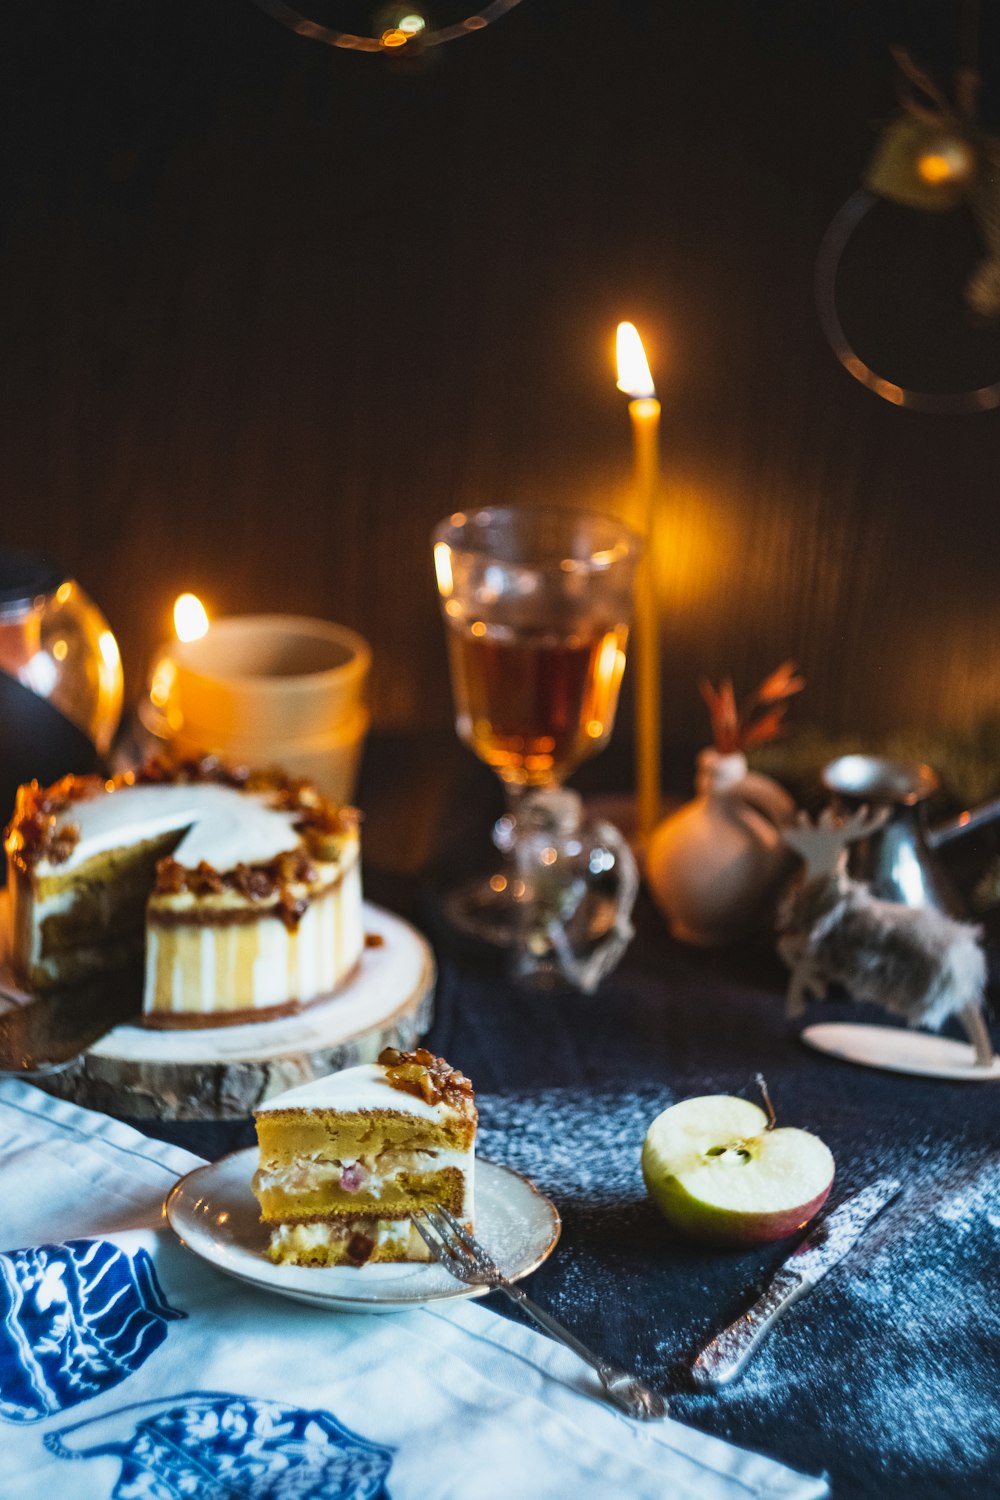 lighted candlestick near glass of white wine, sliced cake, apple fruit, and knife